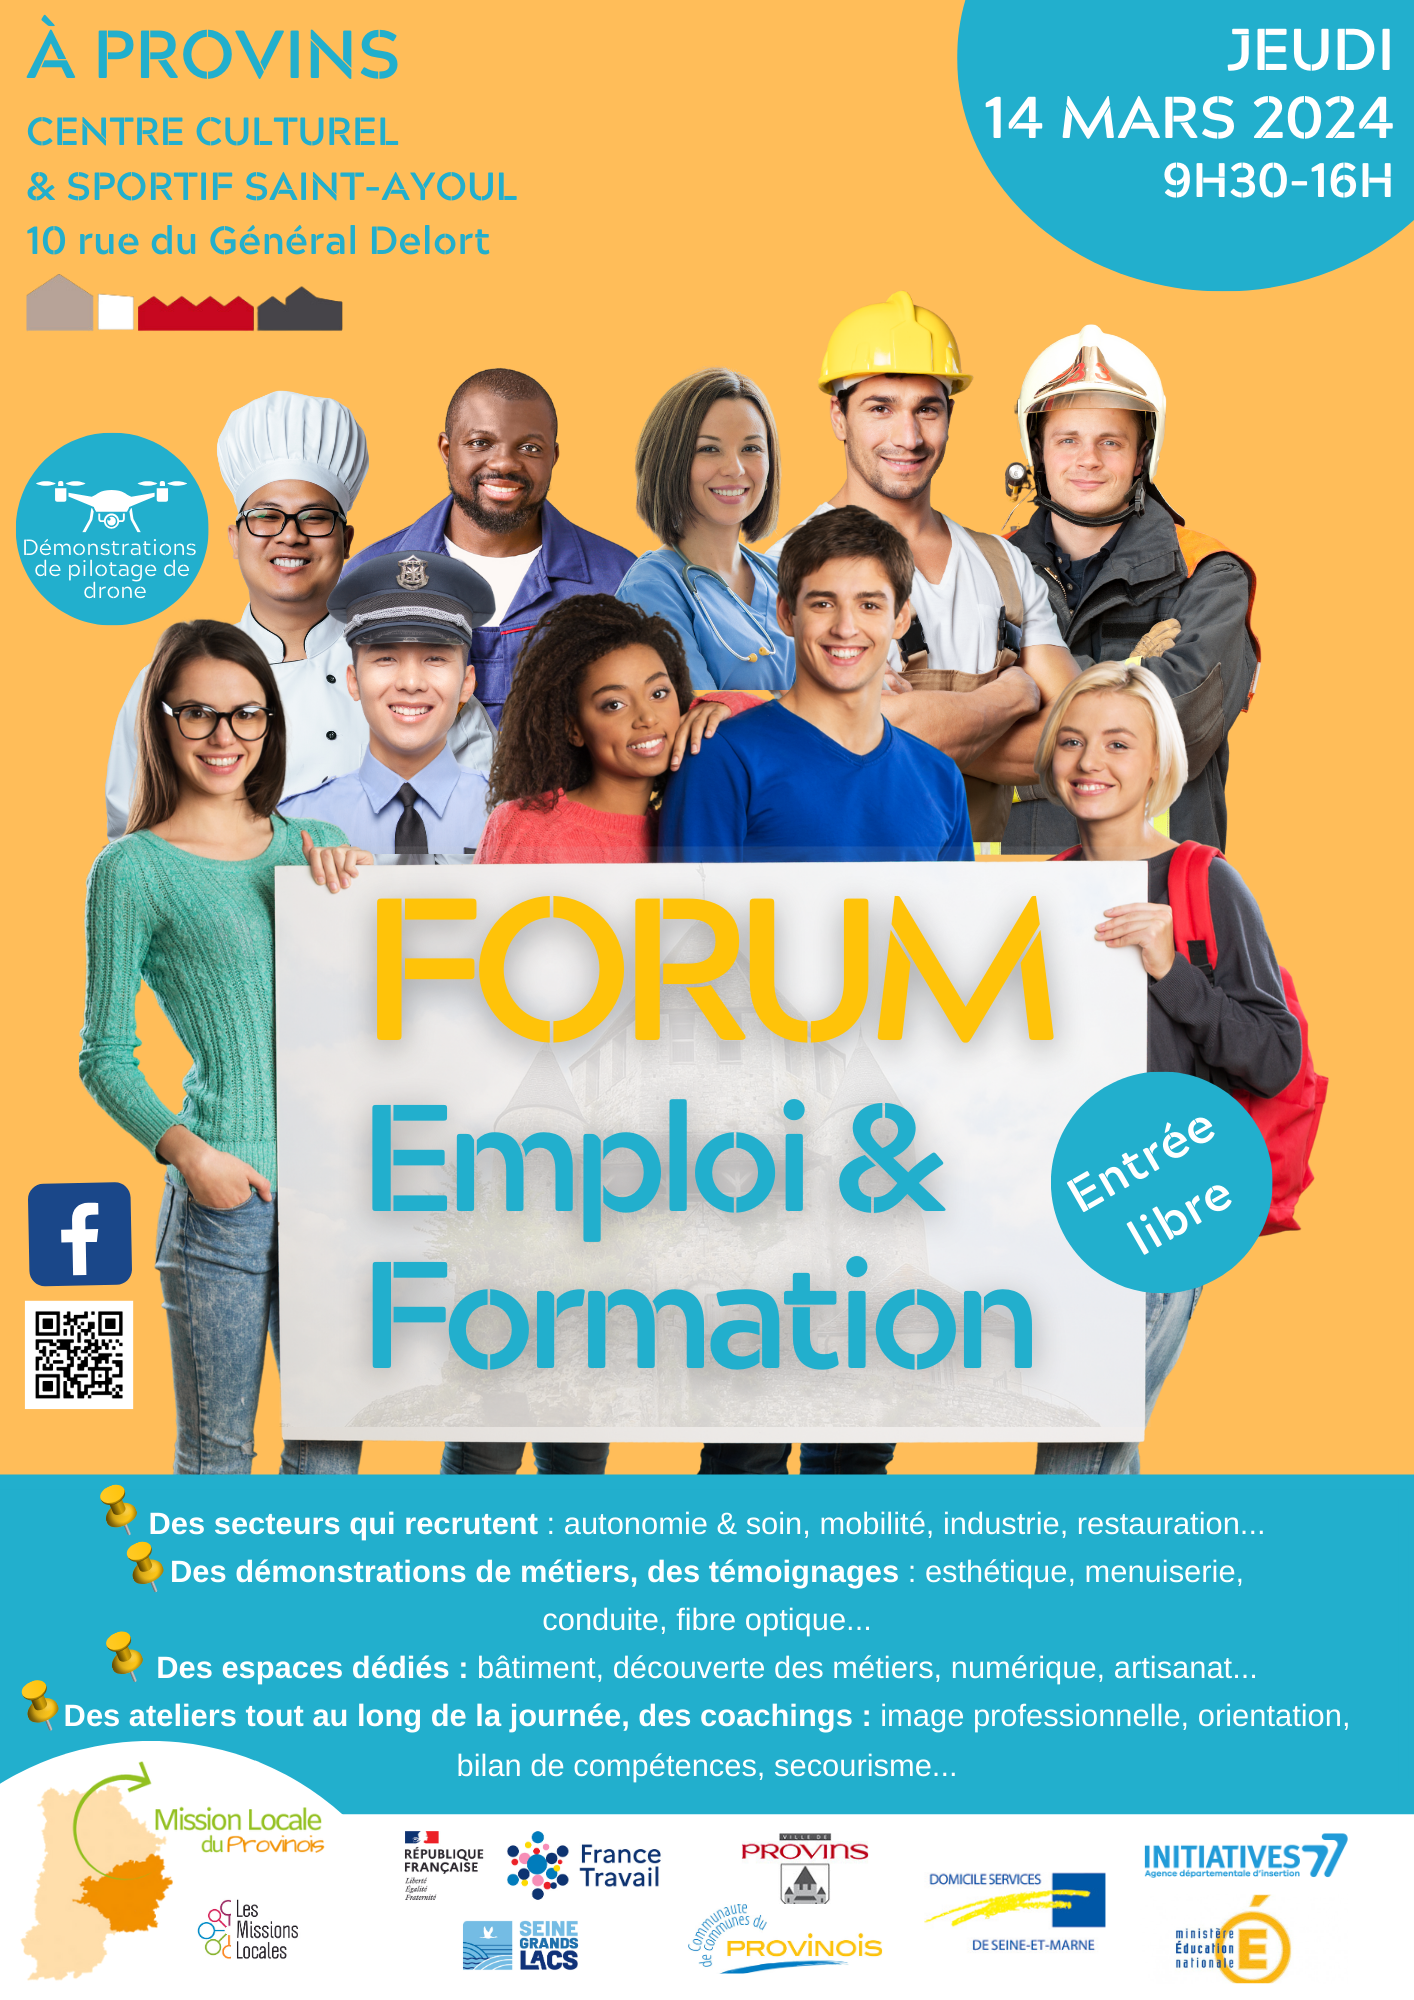 You are currently viewing Forum Emploi & formation – Mission Locale du Provinois